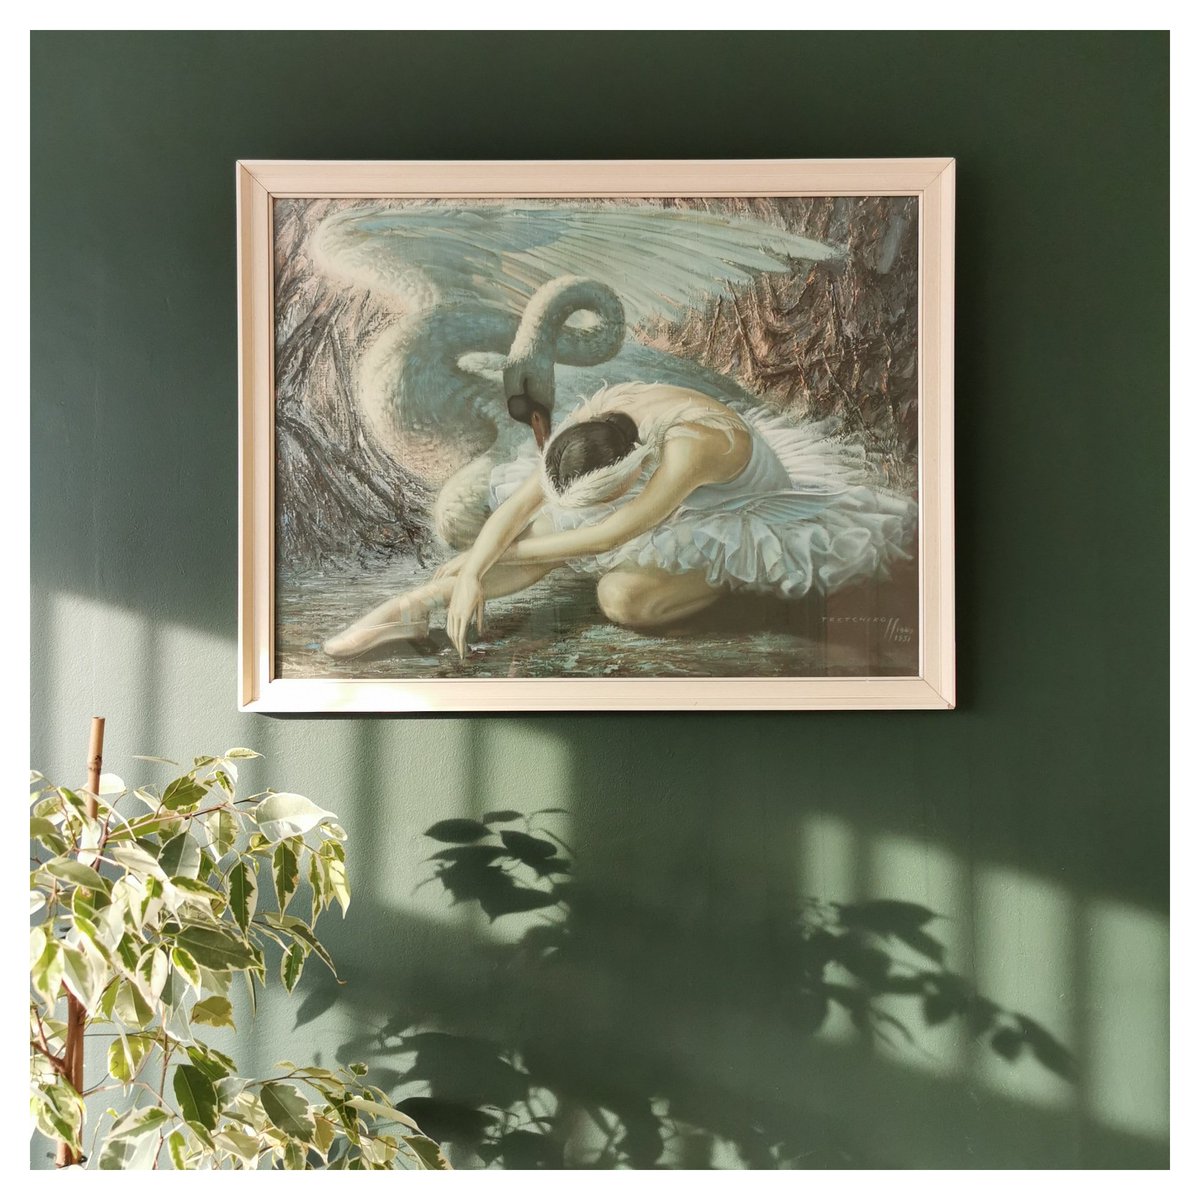 'The Dying Swan' by Vladimir Tretchikoff
Iconic Mid-century print 
theinkjar.bigcartel.com/product/the-dy… 
#kitsch #kitschdecor #kitschart #vintageart #tretchikoff #tretchikoffprint #midcenturystyle #midcenturyart #midcenturydecor #1950s #vladimirtretchikoff #vintagestyle #vintageforsale